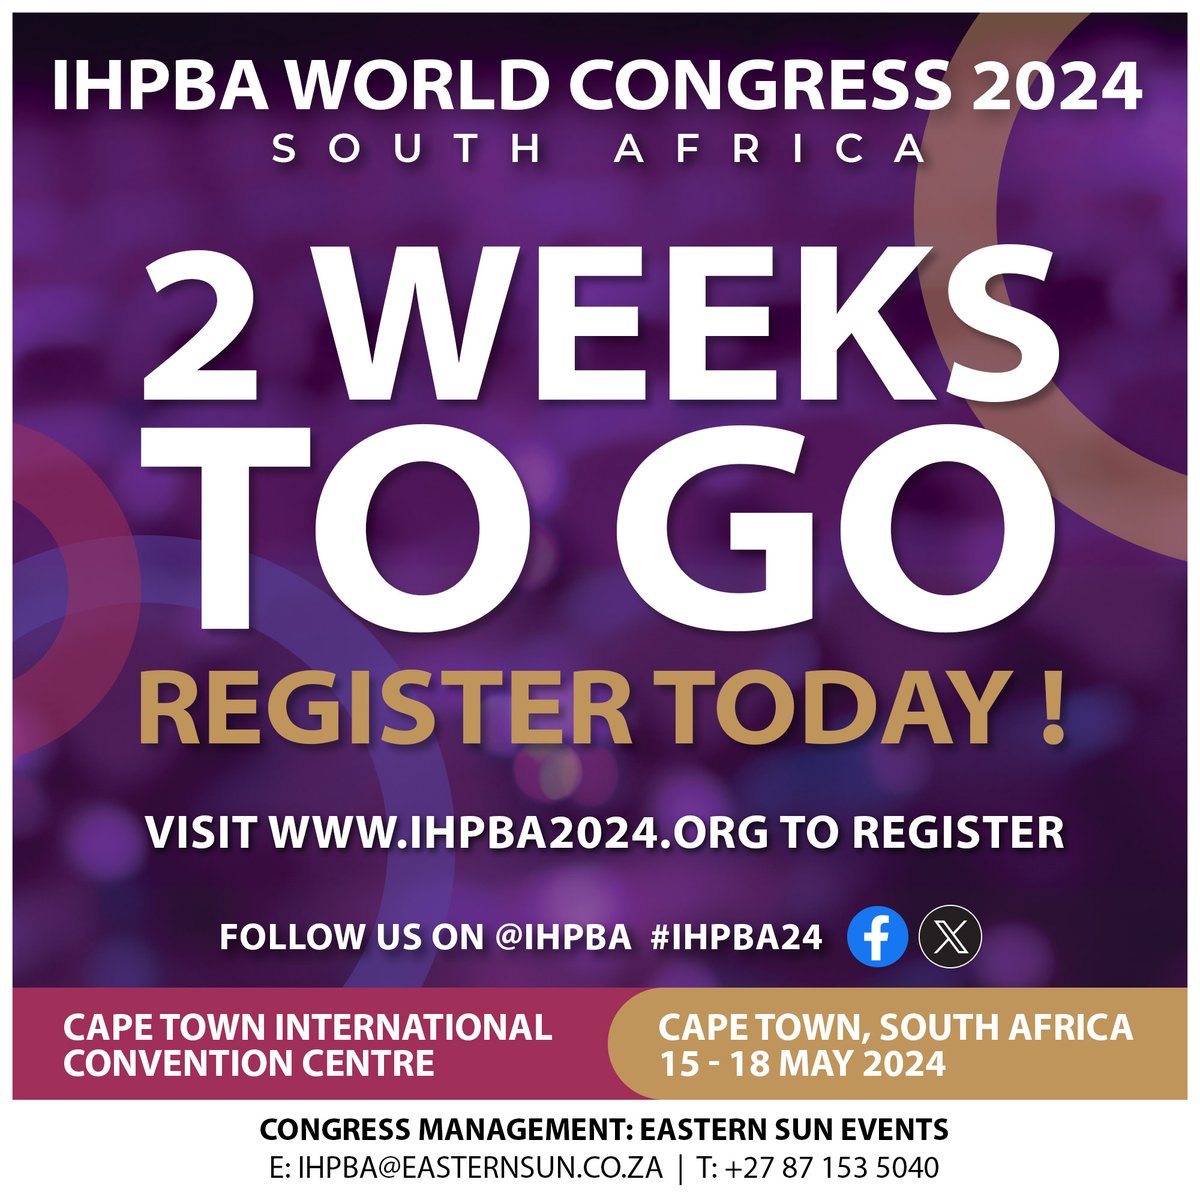 Only 2 weeks left to go until the IHPBA 2024 World Congress in Cape Town, South Africa. There is still time to register on ihpba2024.org. If you can’t make it in person, register for our virtual congress and enjoy simultaneous translation in over 50 languages.